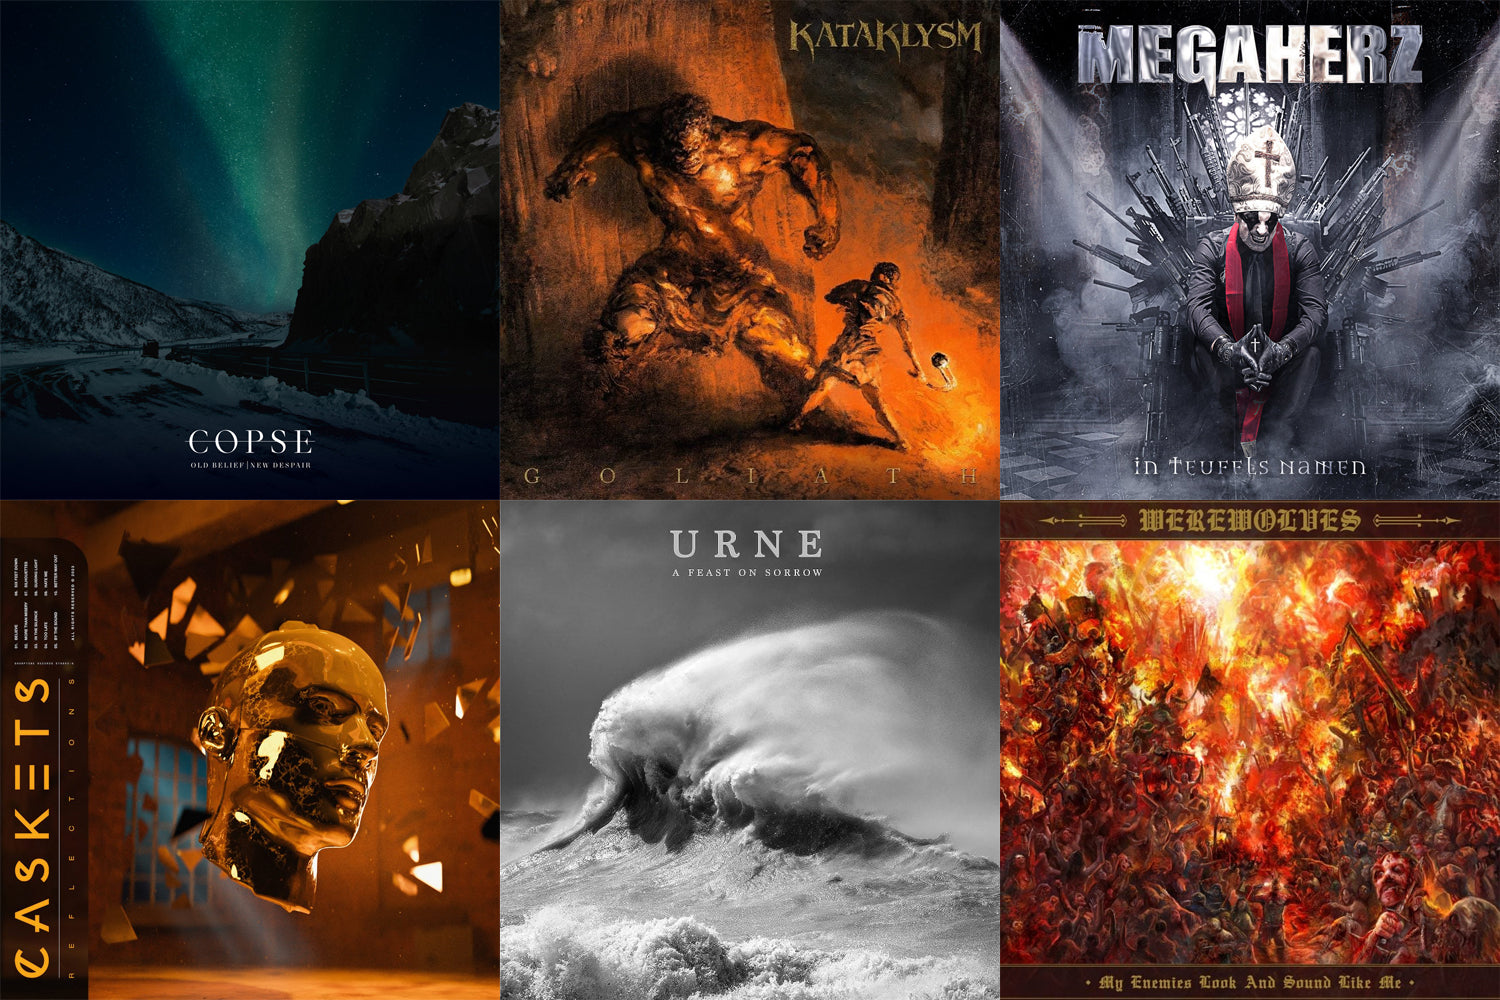 NEW FLESH 8/11: RELEASES FROM KATAKLYSM, URNE AND MORE!